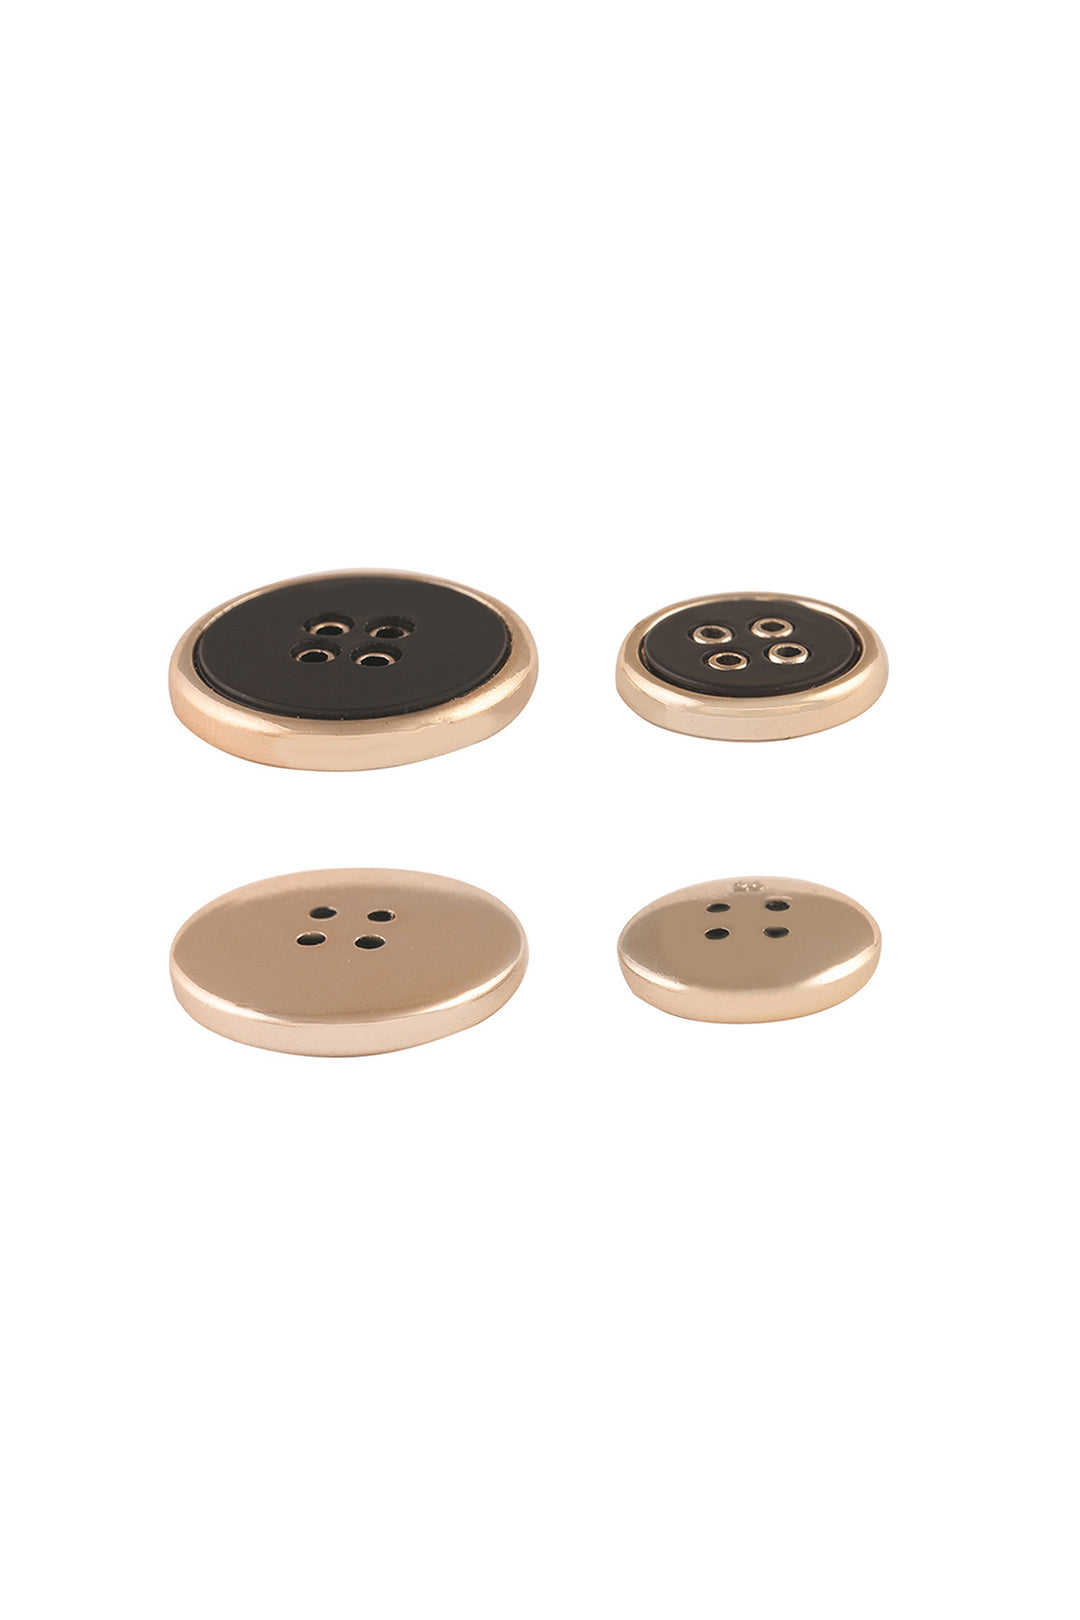 Black with Golden Round Shape 4-Hole ABS Button